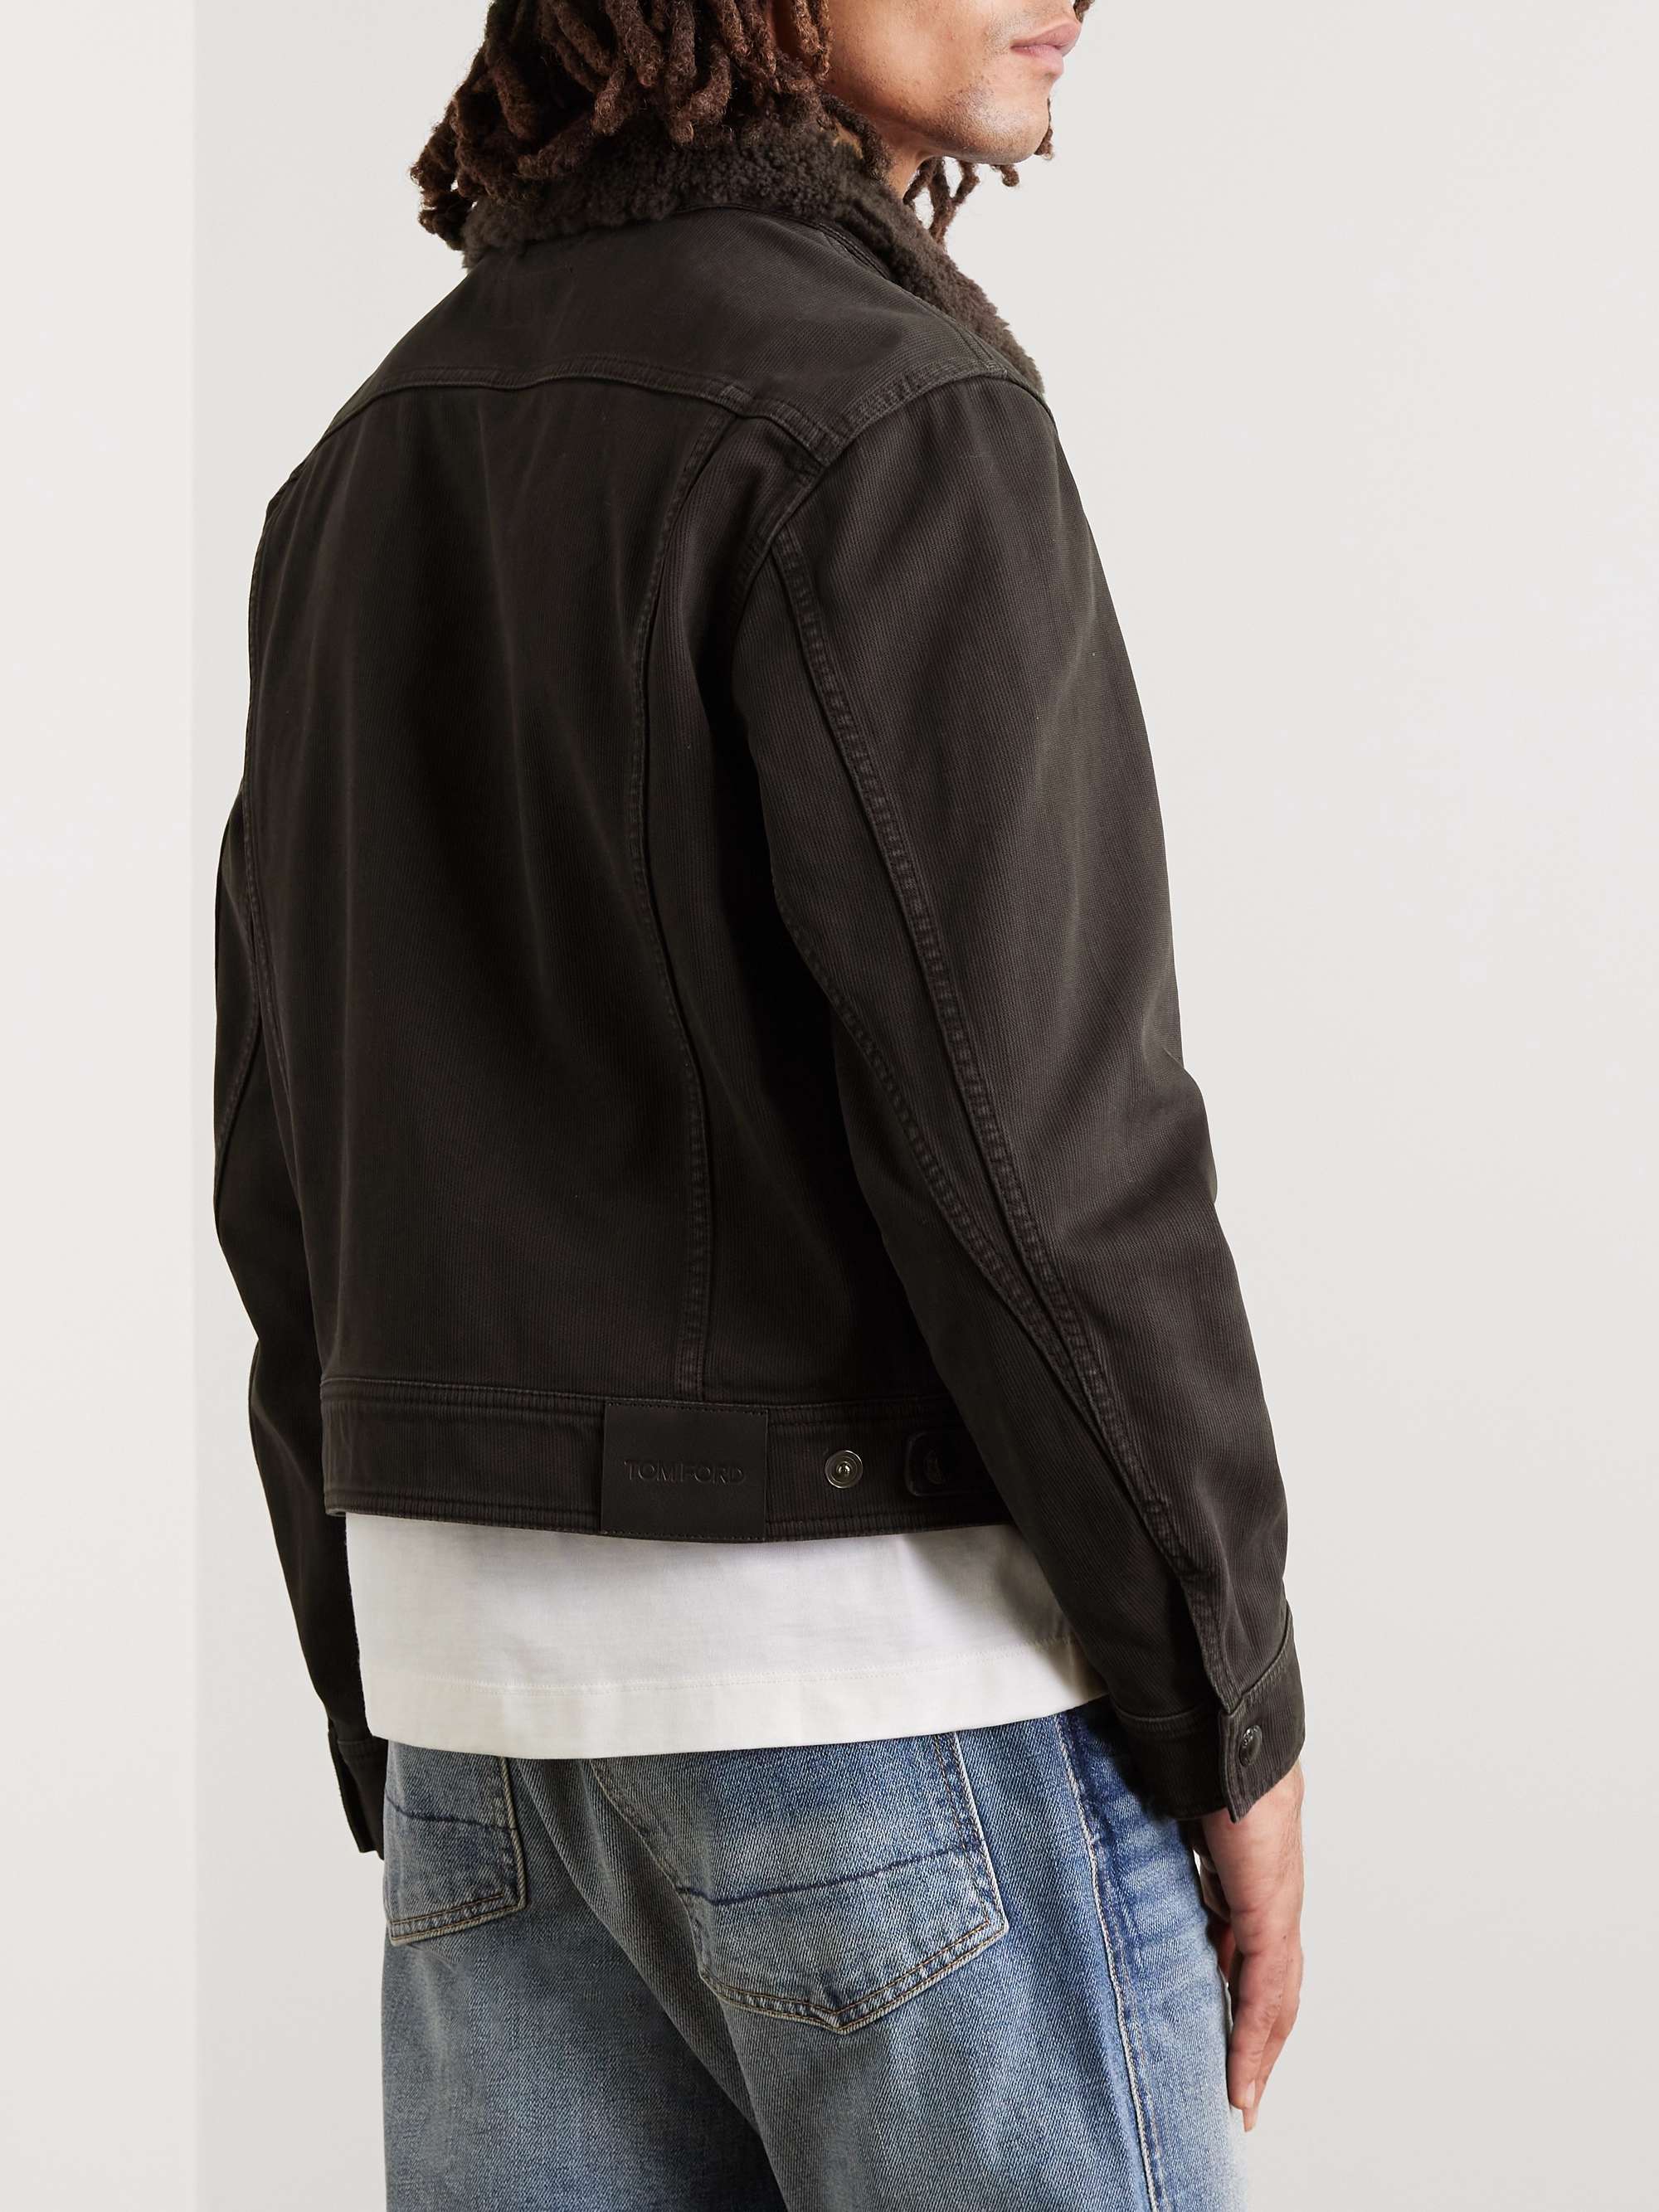 TOM FORD Bedford Shearling-Trimmed Cotton-Corduroy Trucker Jacket